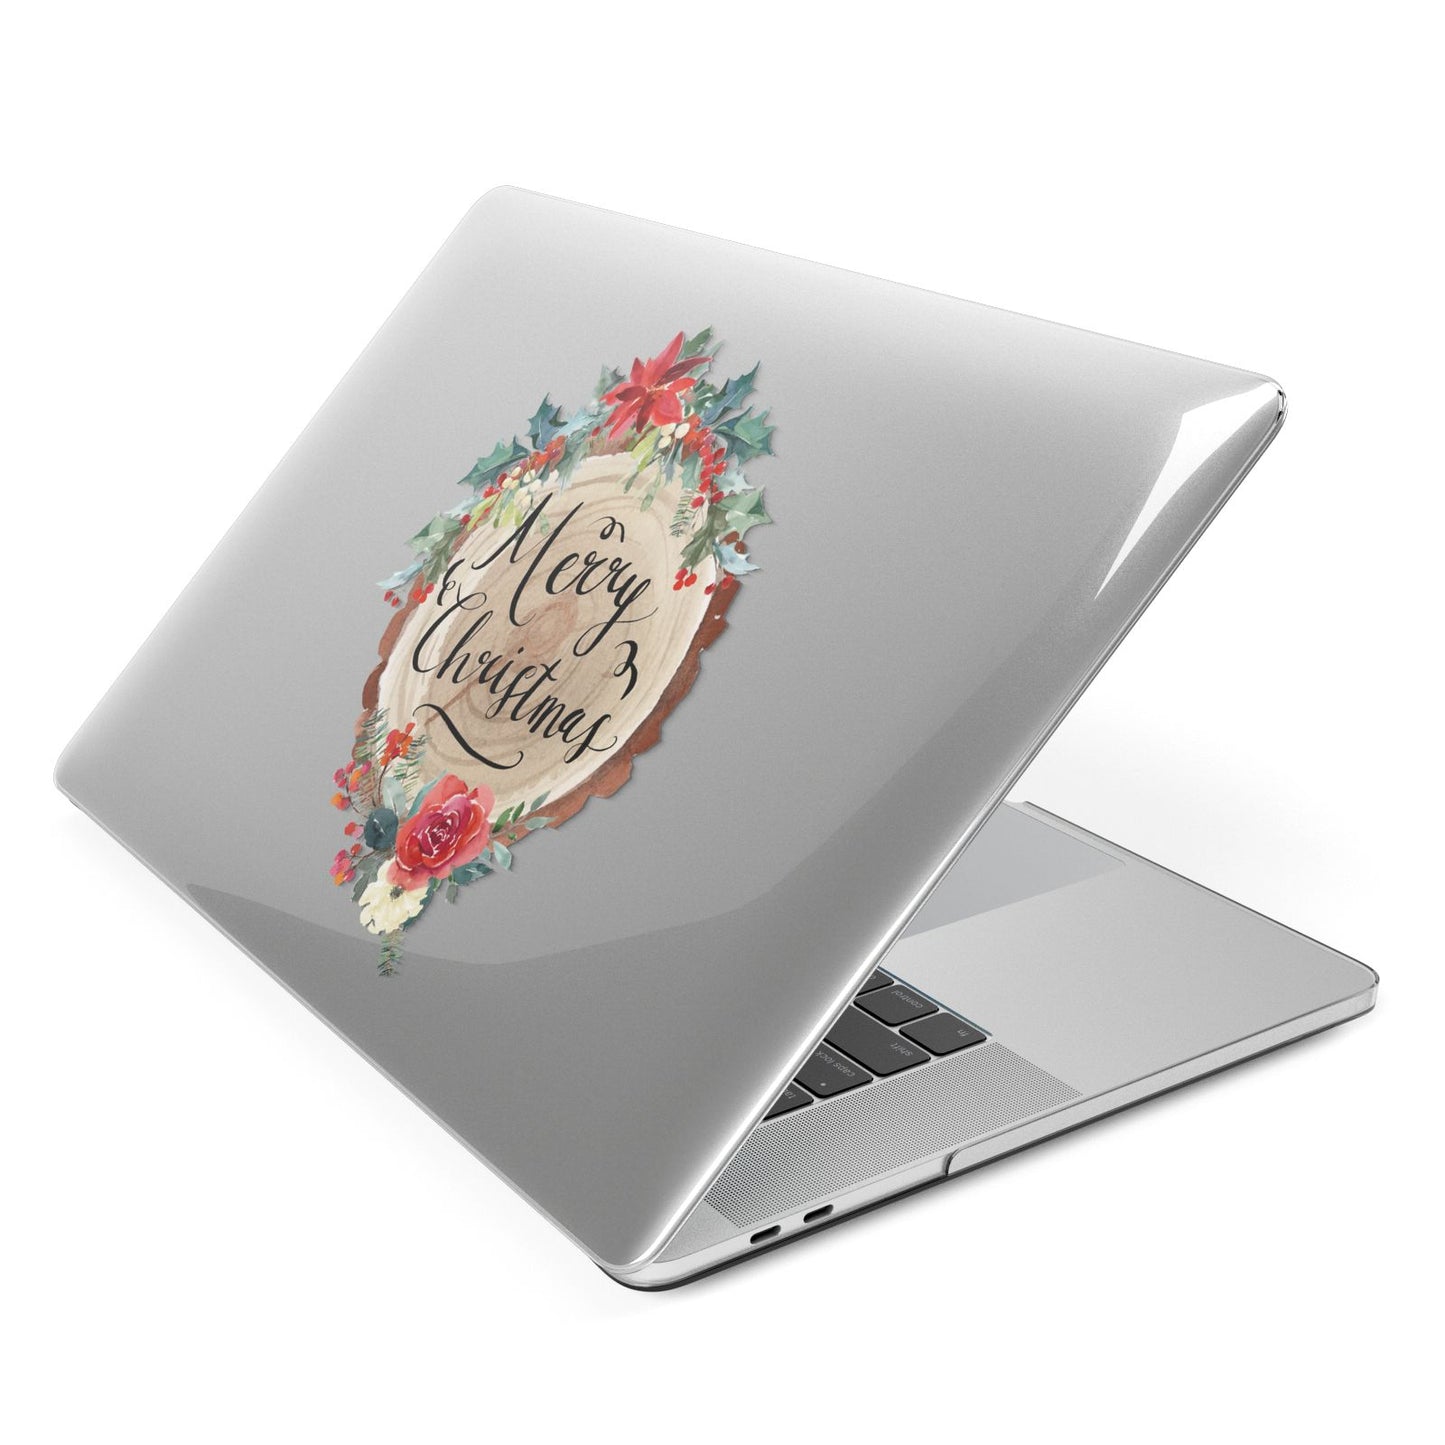 Merry Christmas Log Floral Apple MacBook Case Side View